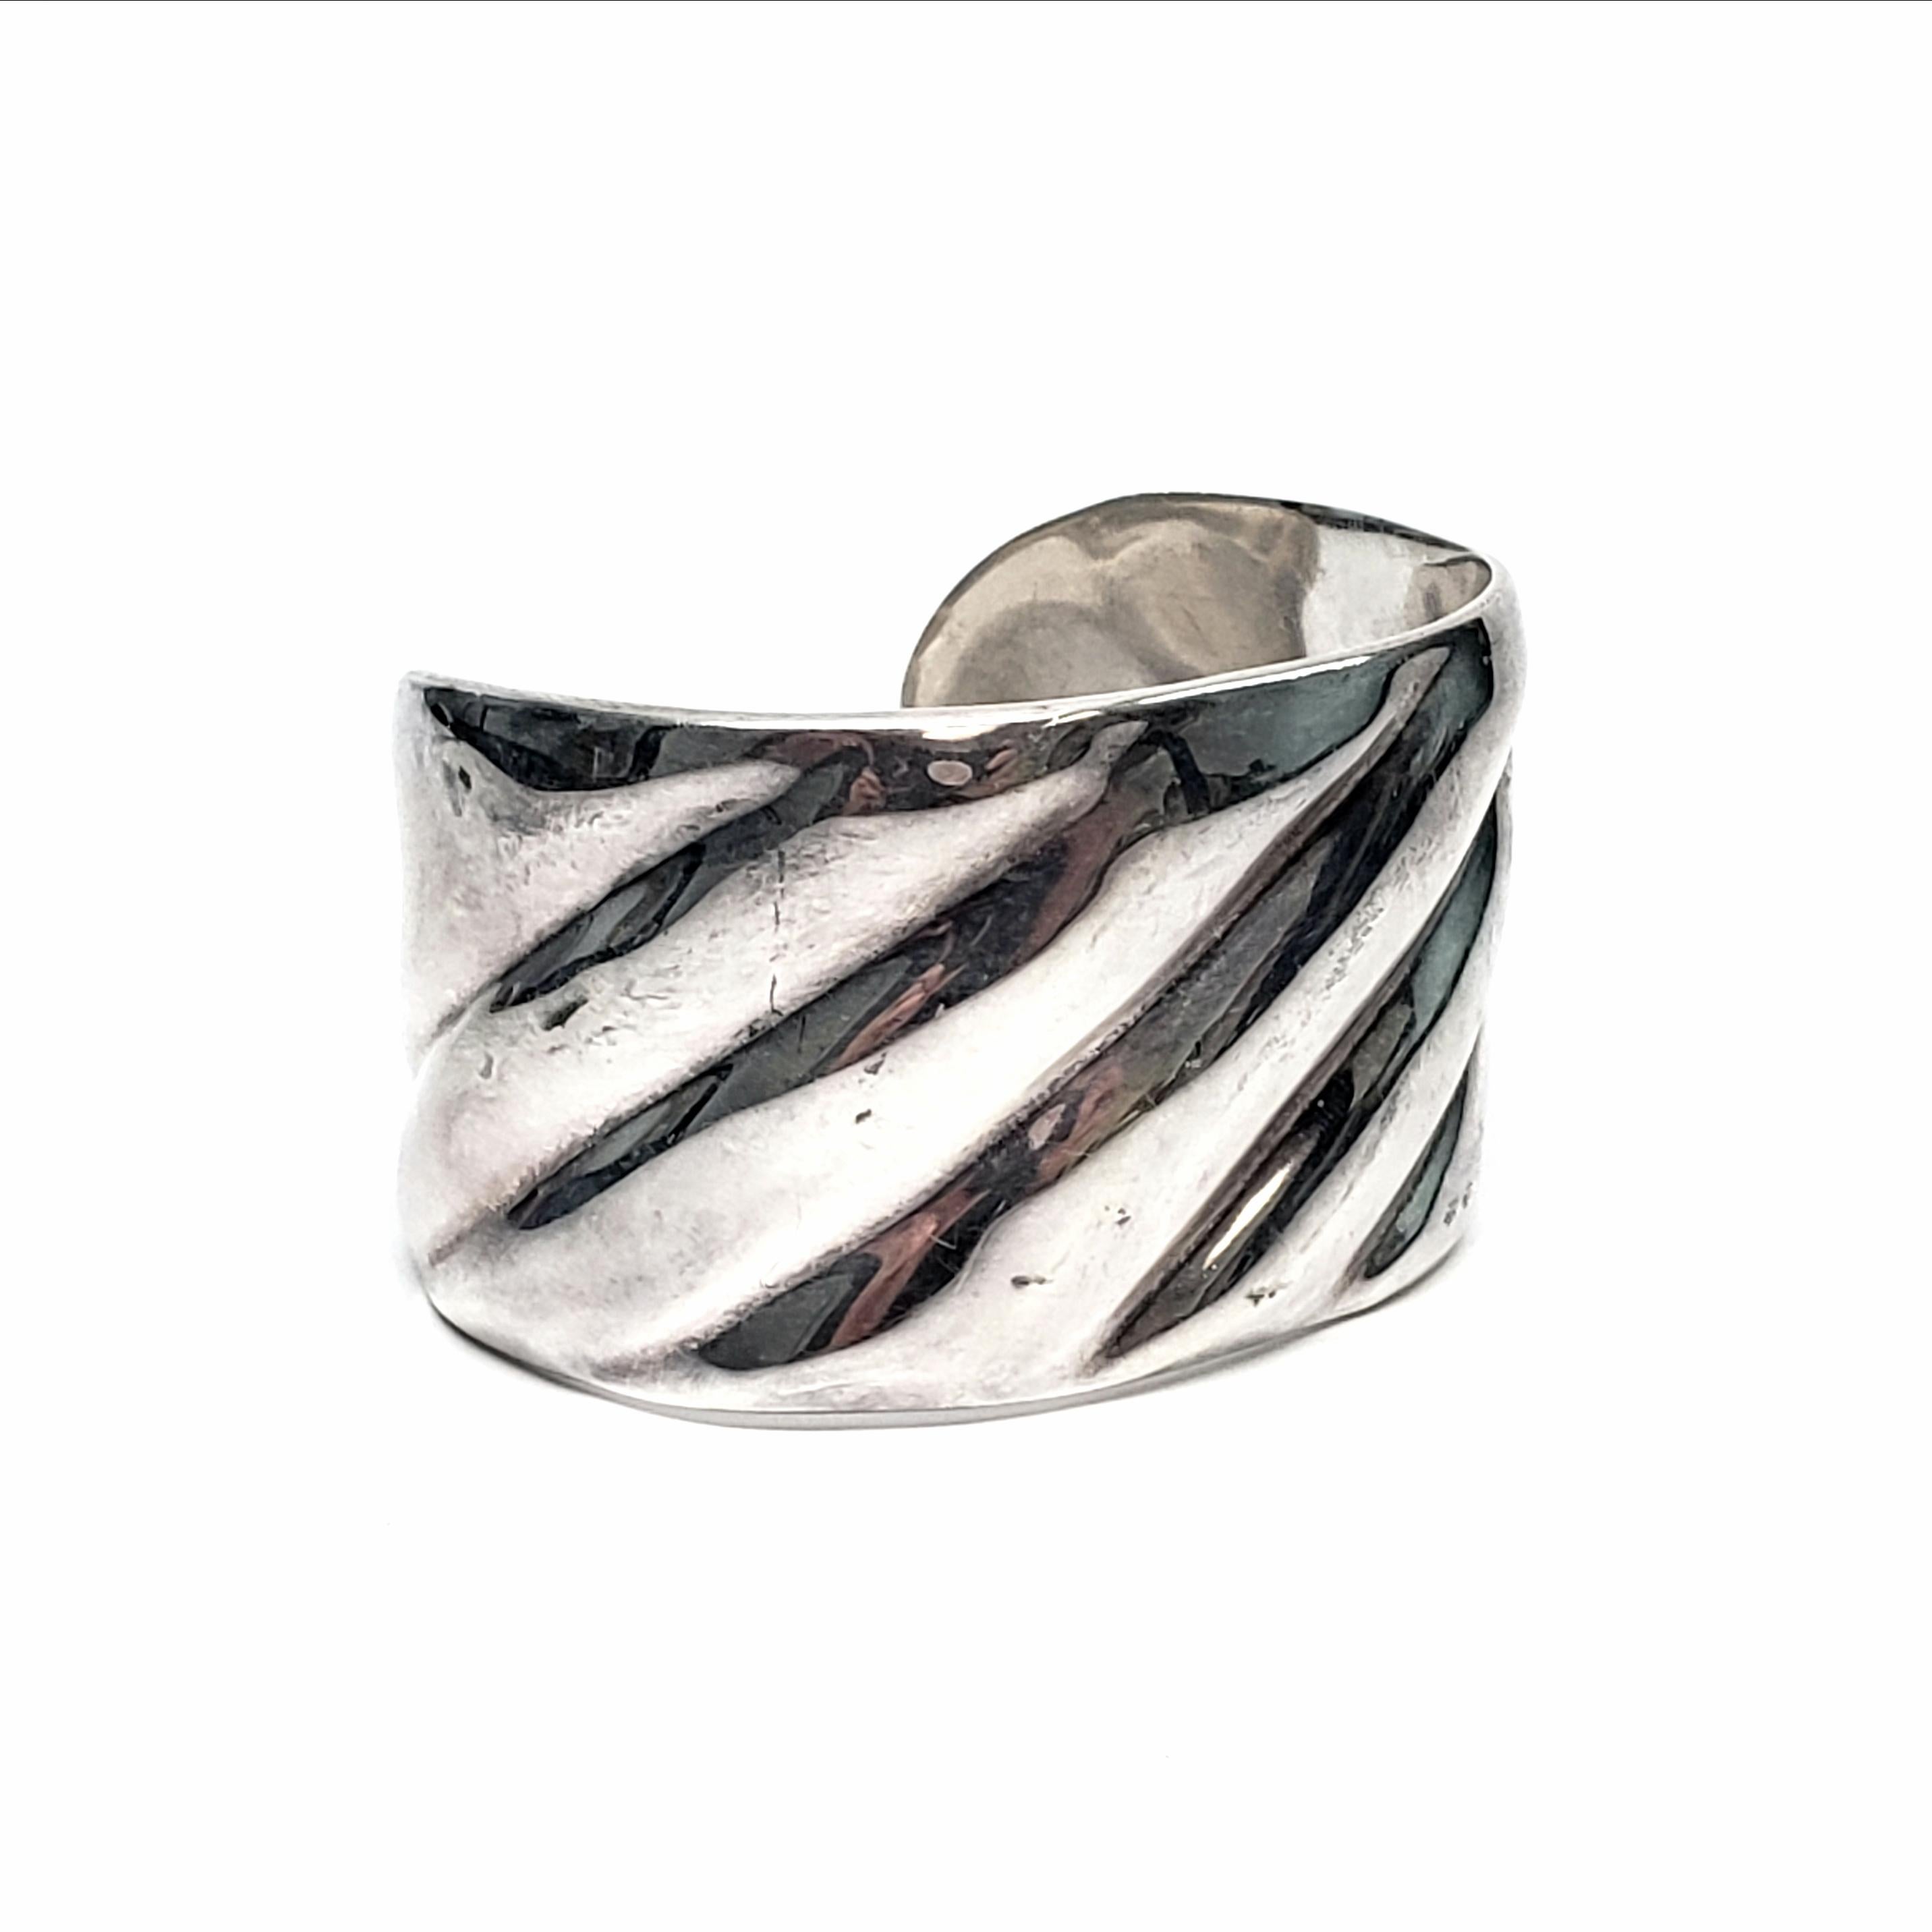 Sterling silver cuff bracelet by Mexican artisan, Roberto Ballesteros.

Beautifully crafted wide cuff bracelet with a ribbed design.

Measures approx 5 1/2